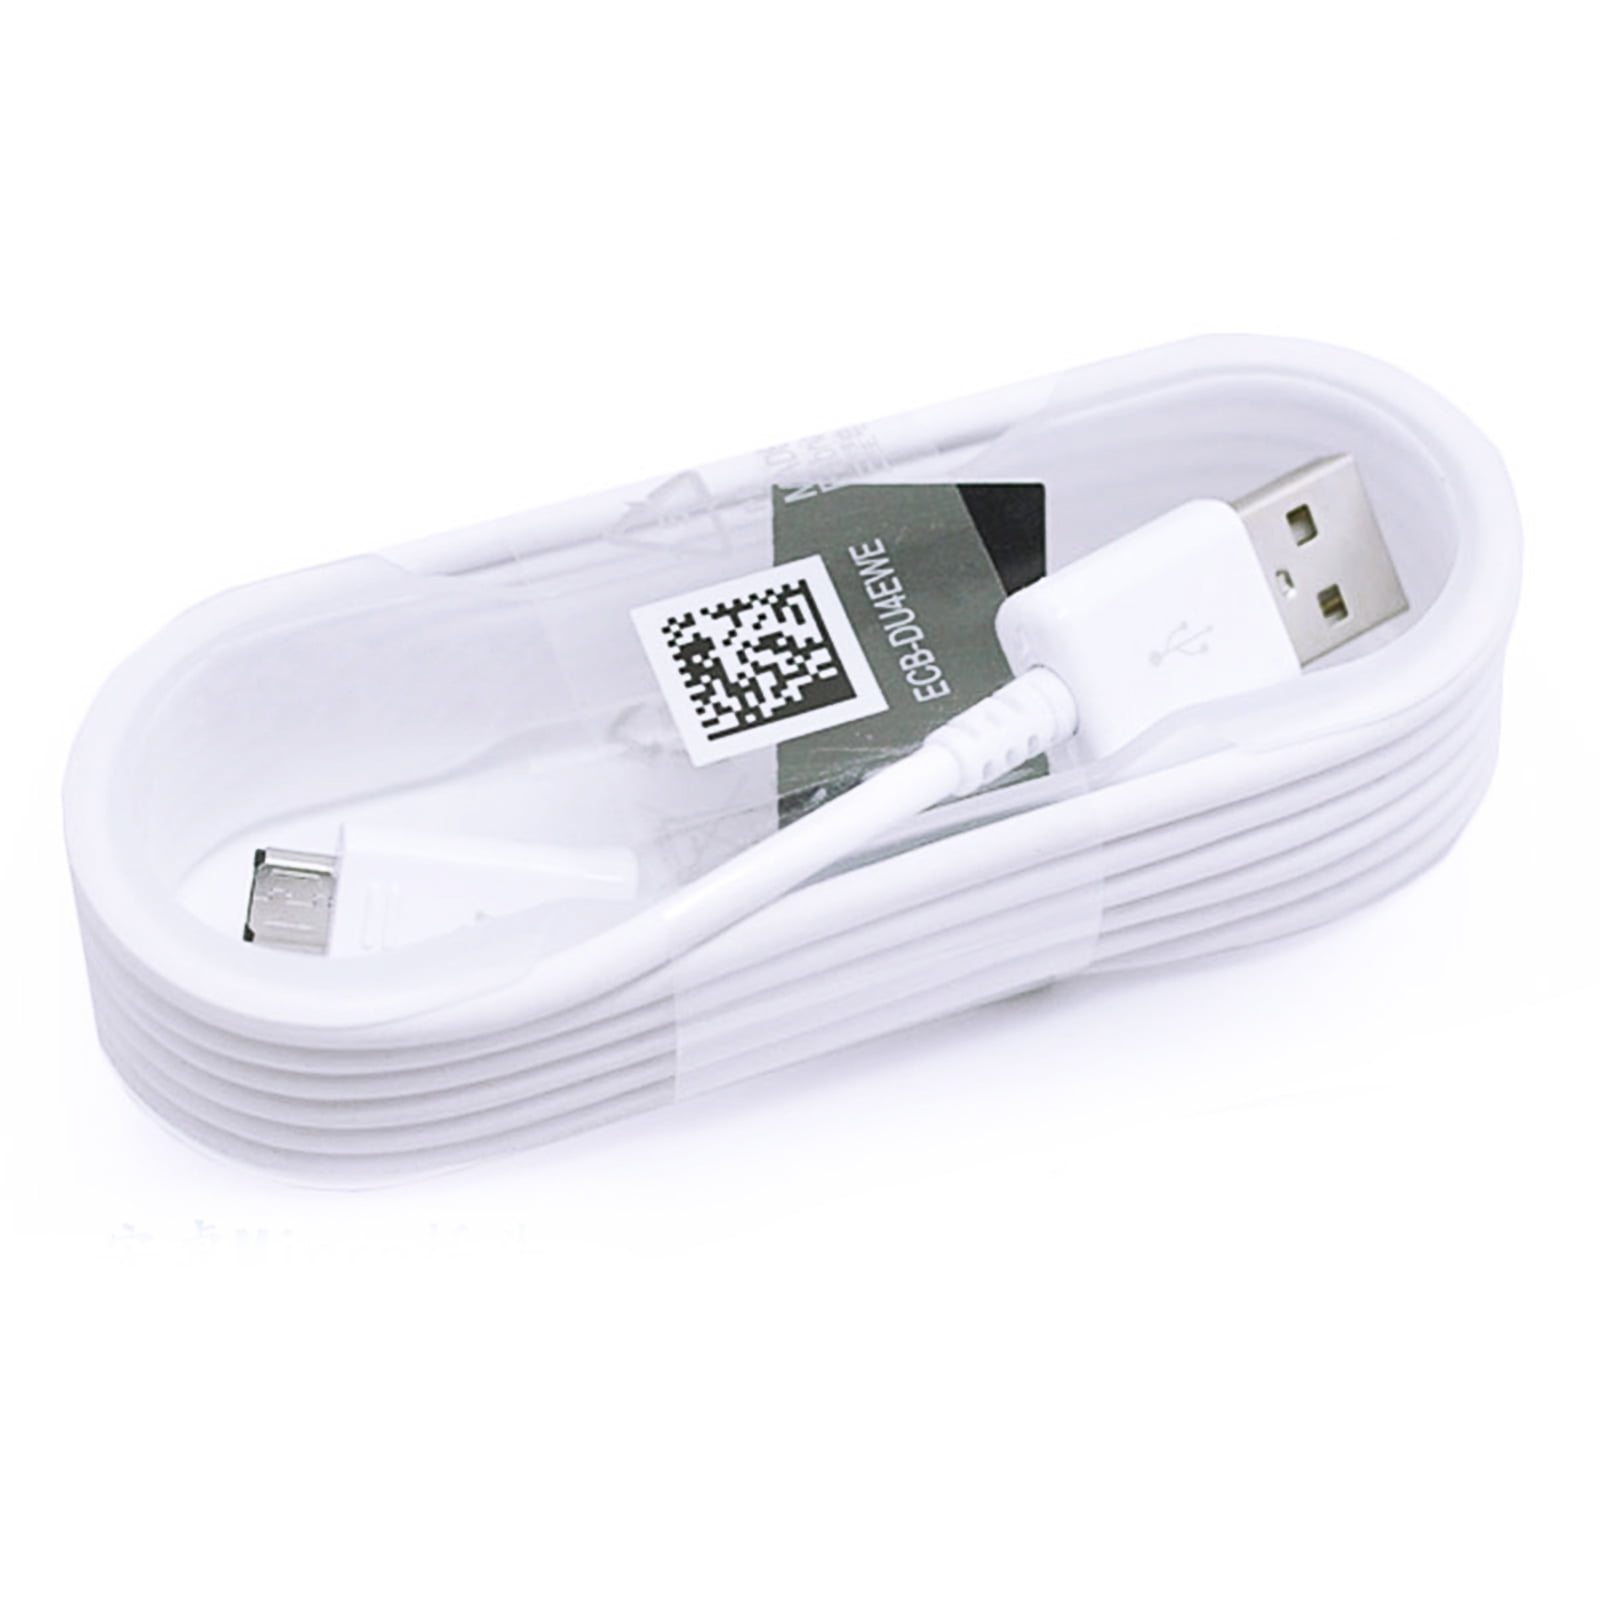 Charger Cable for Samsung PL121 PL122 HIGH QUALITY USB Data Sync 